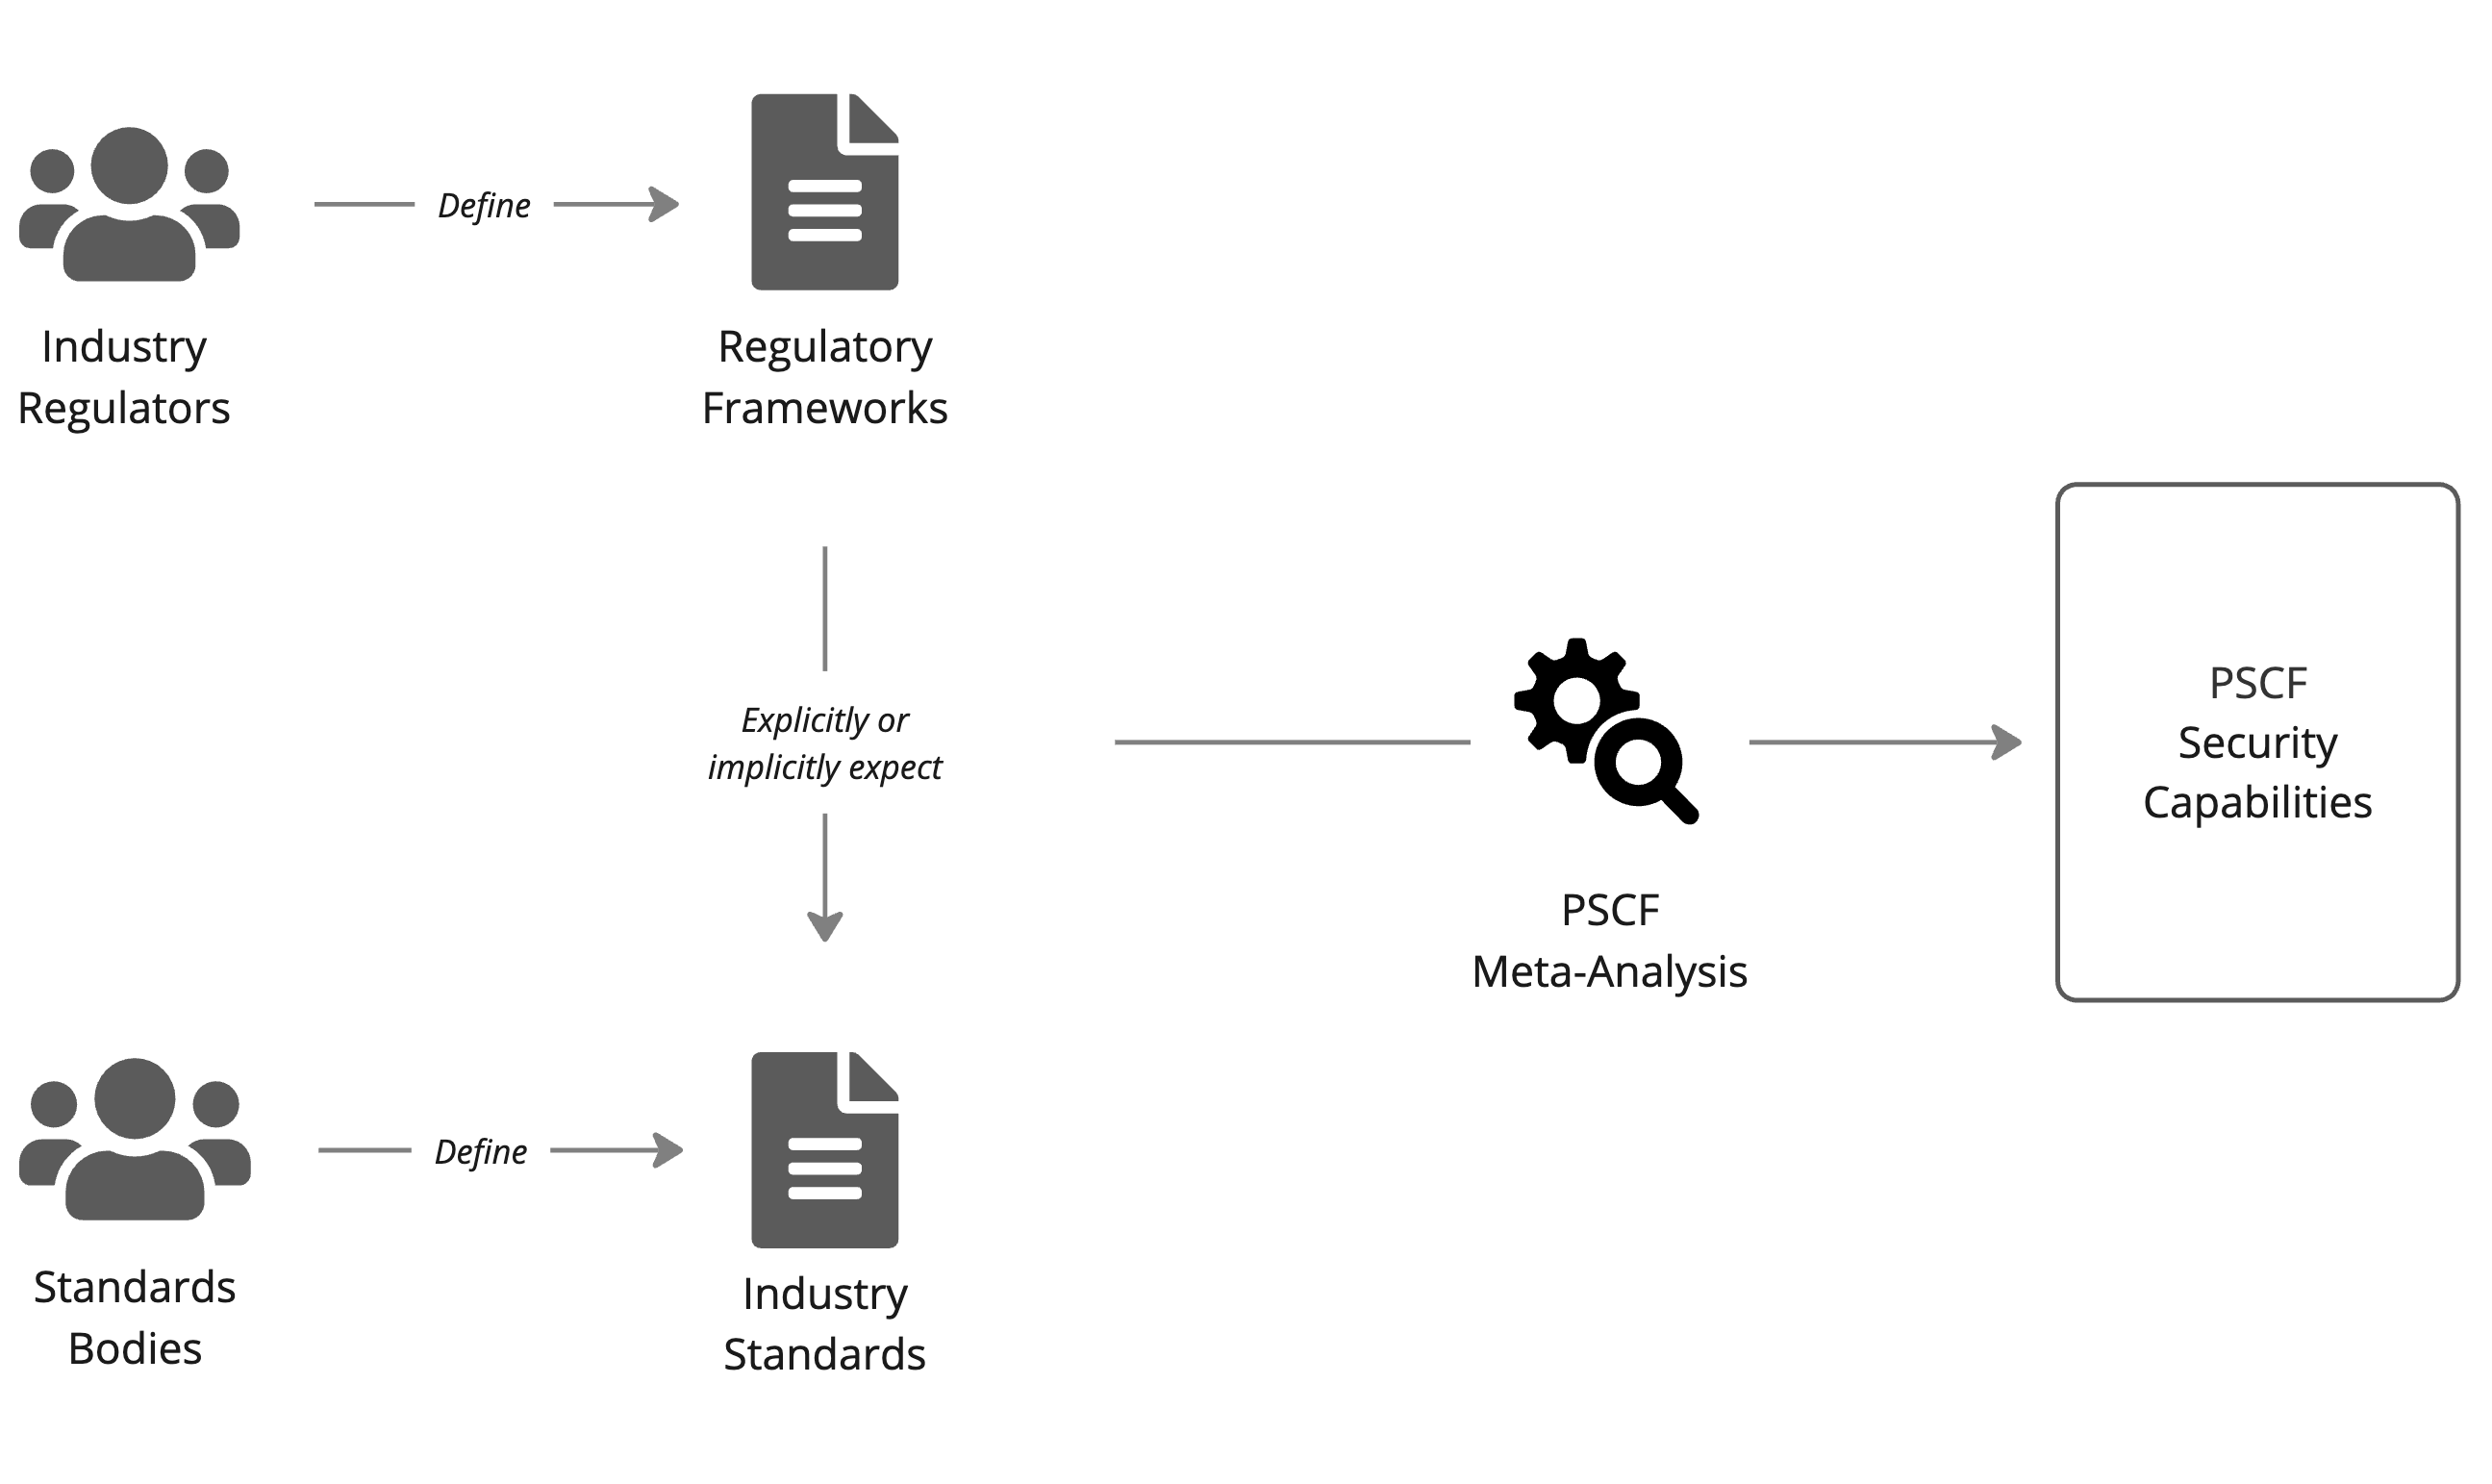 A process diagram of how the PSCF derives security capabilites from regulatory frameworks and industry standards